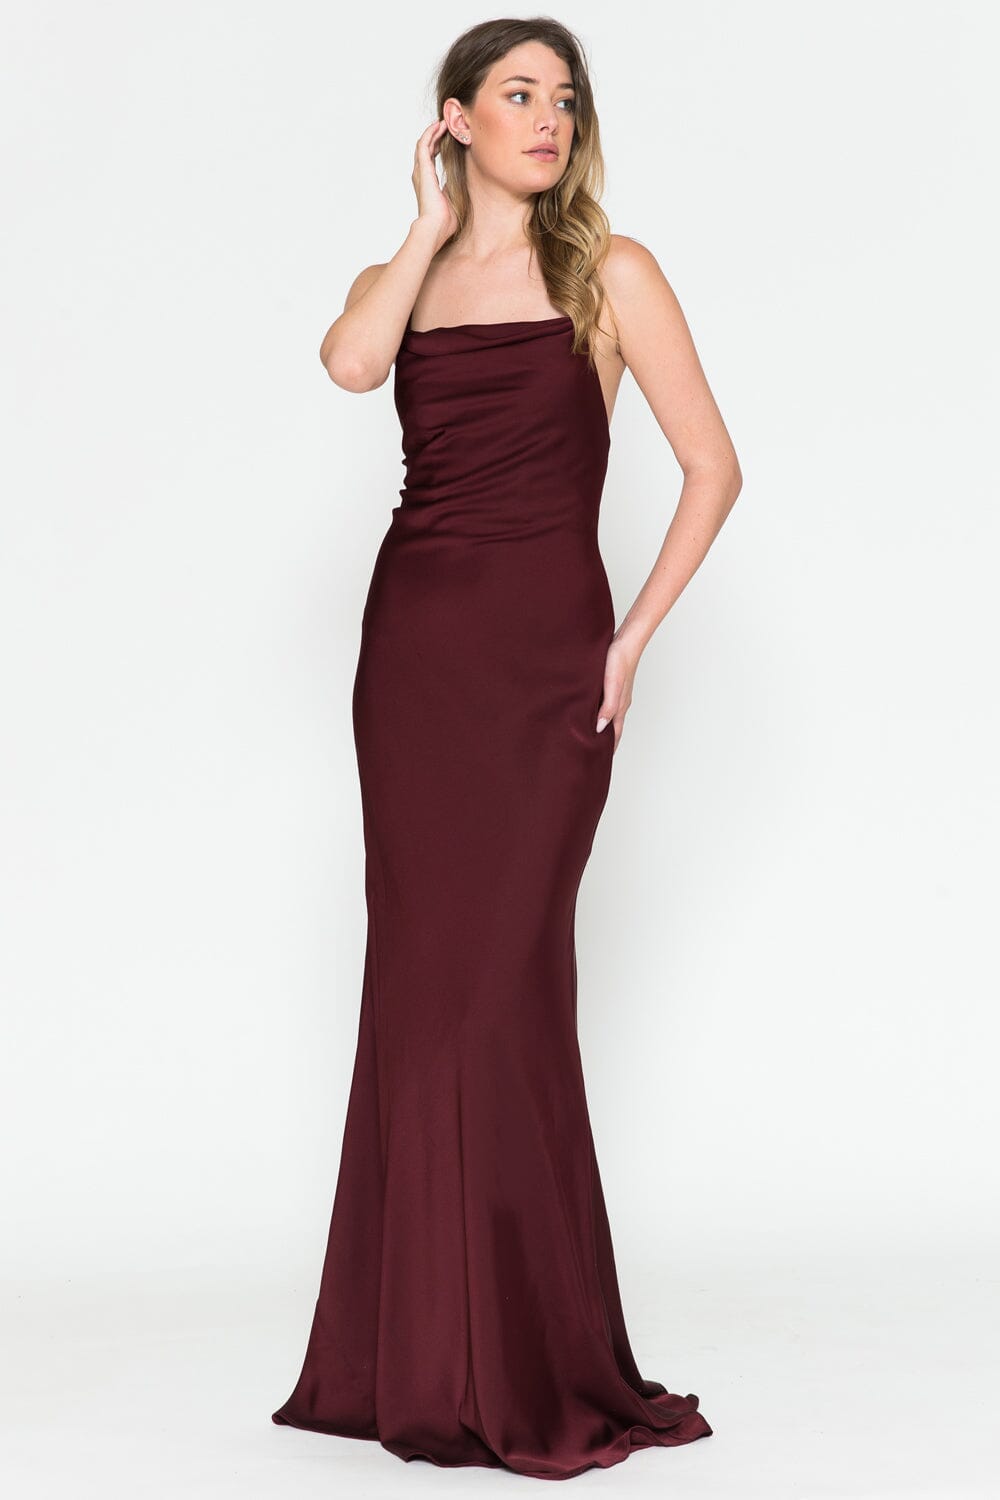 Satin Long Sleeveless Cowl Dress by Amelia Couture 6111